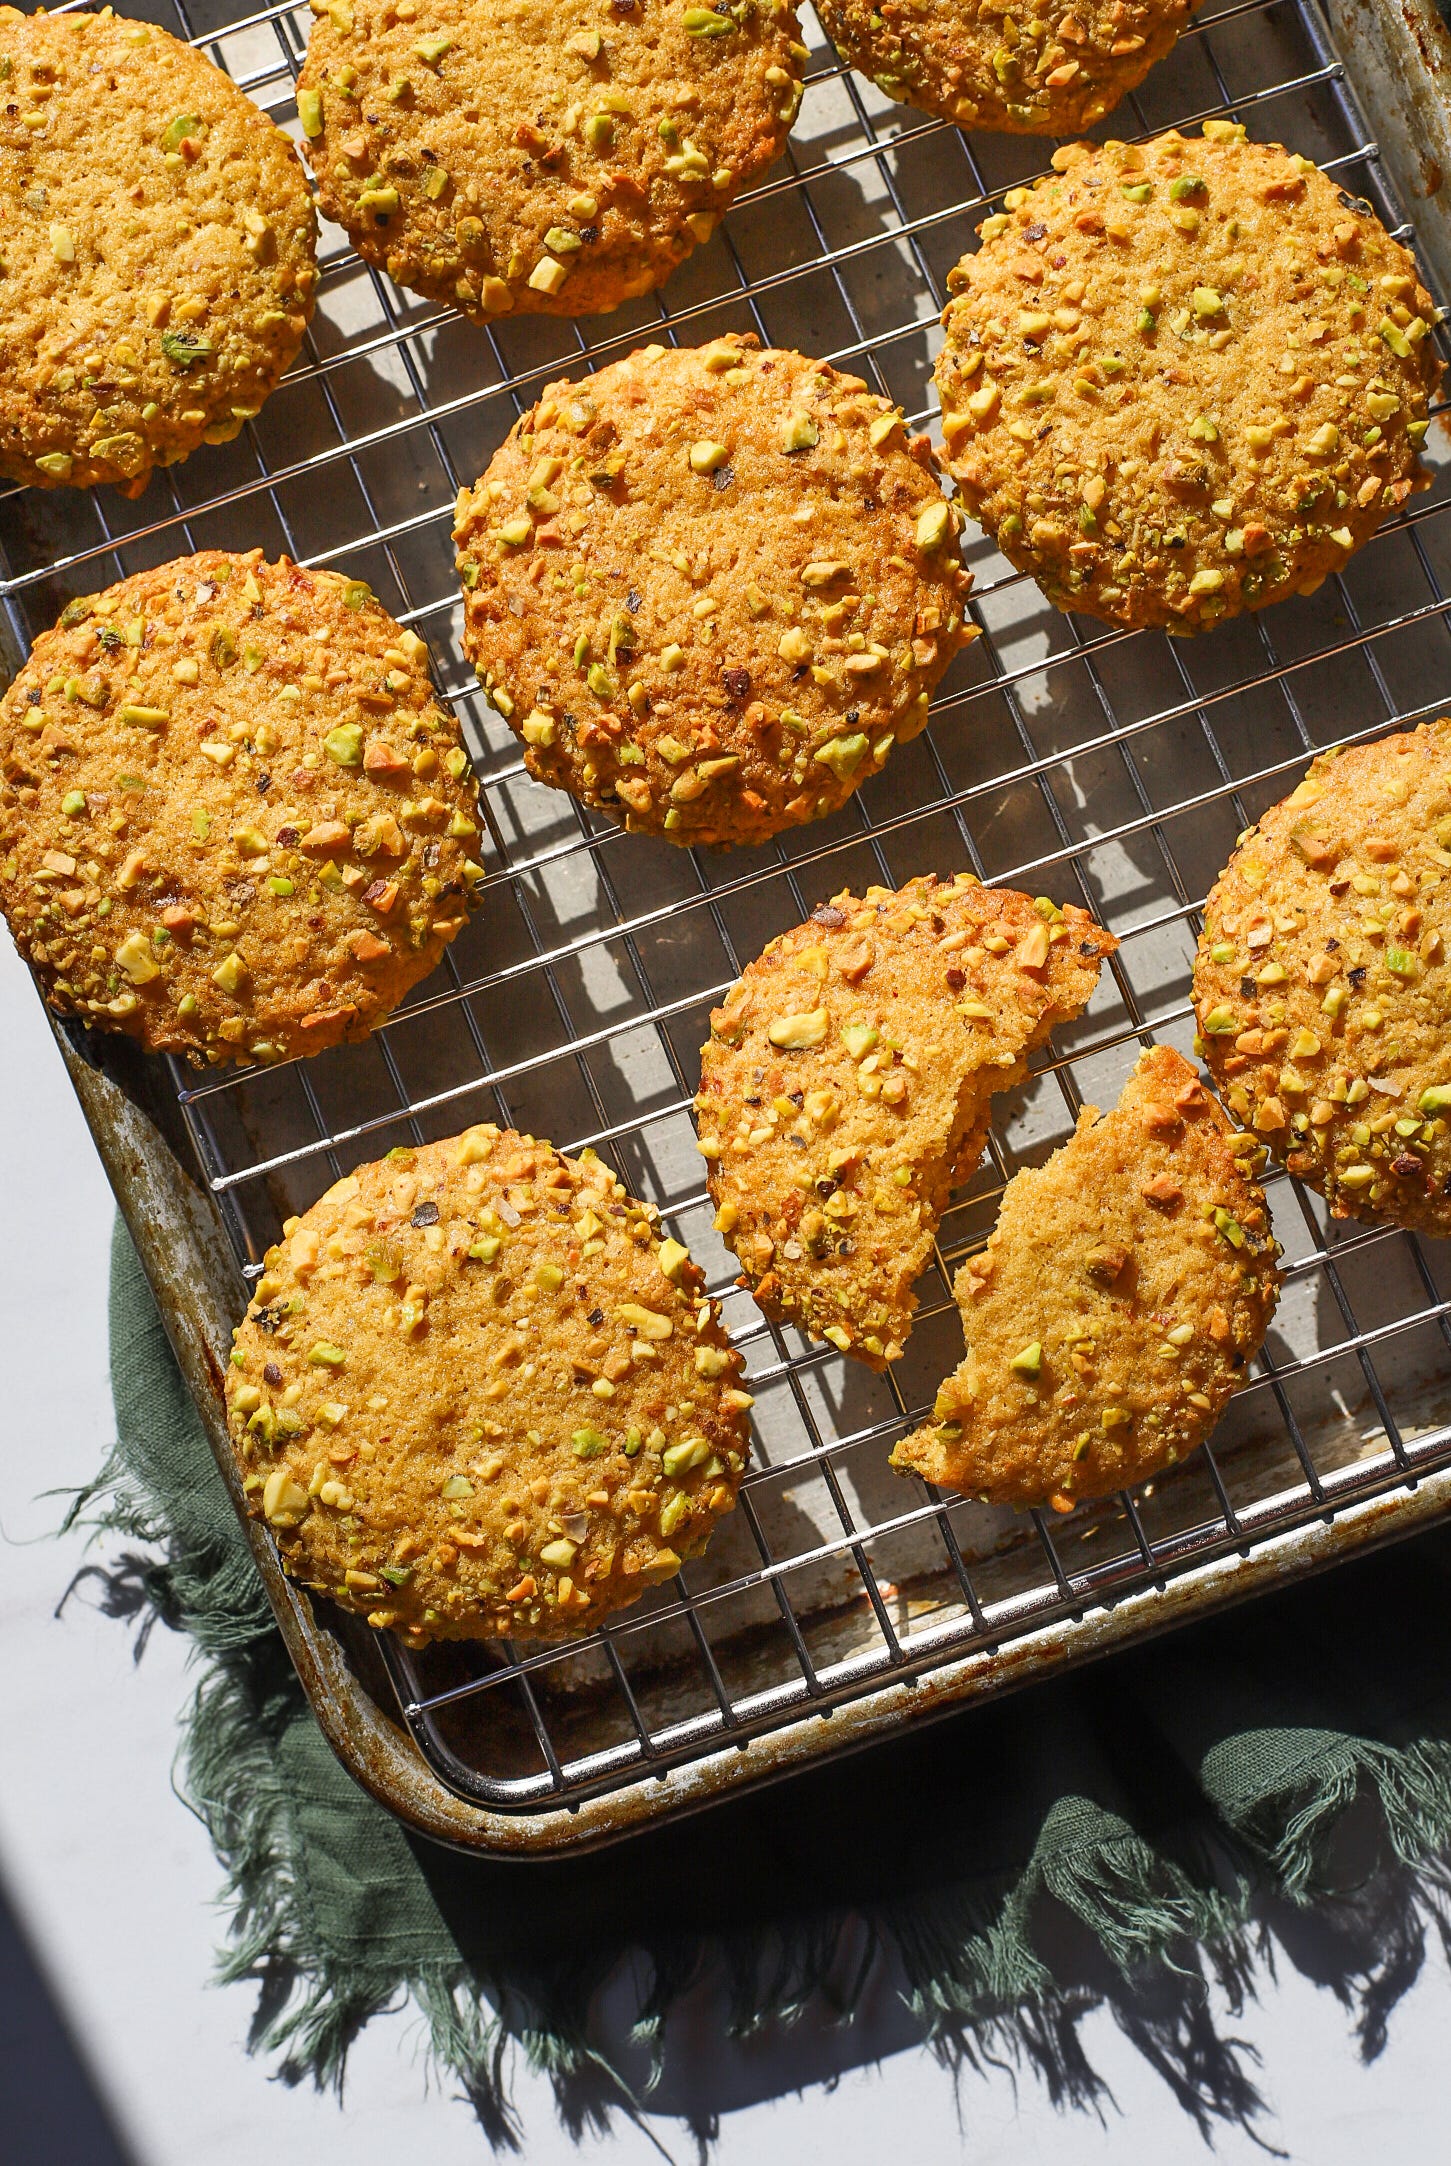 Tray of saffron and pistachio cookies on a rack